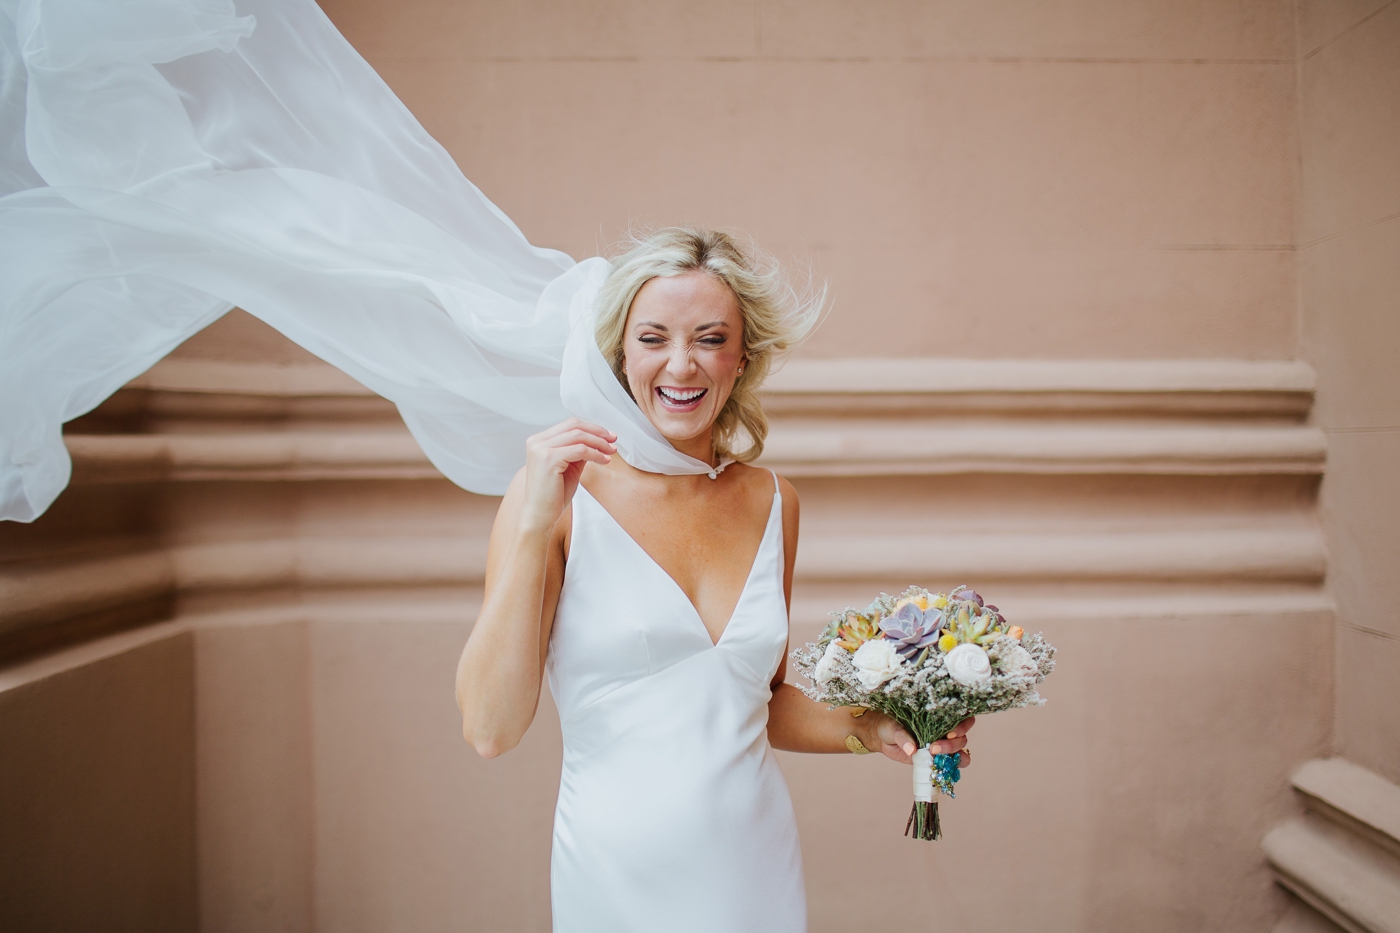 Charleston wedding photography by Izzy and Co.